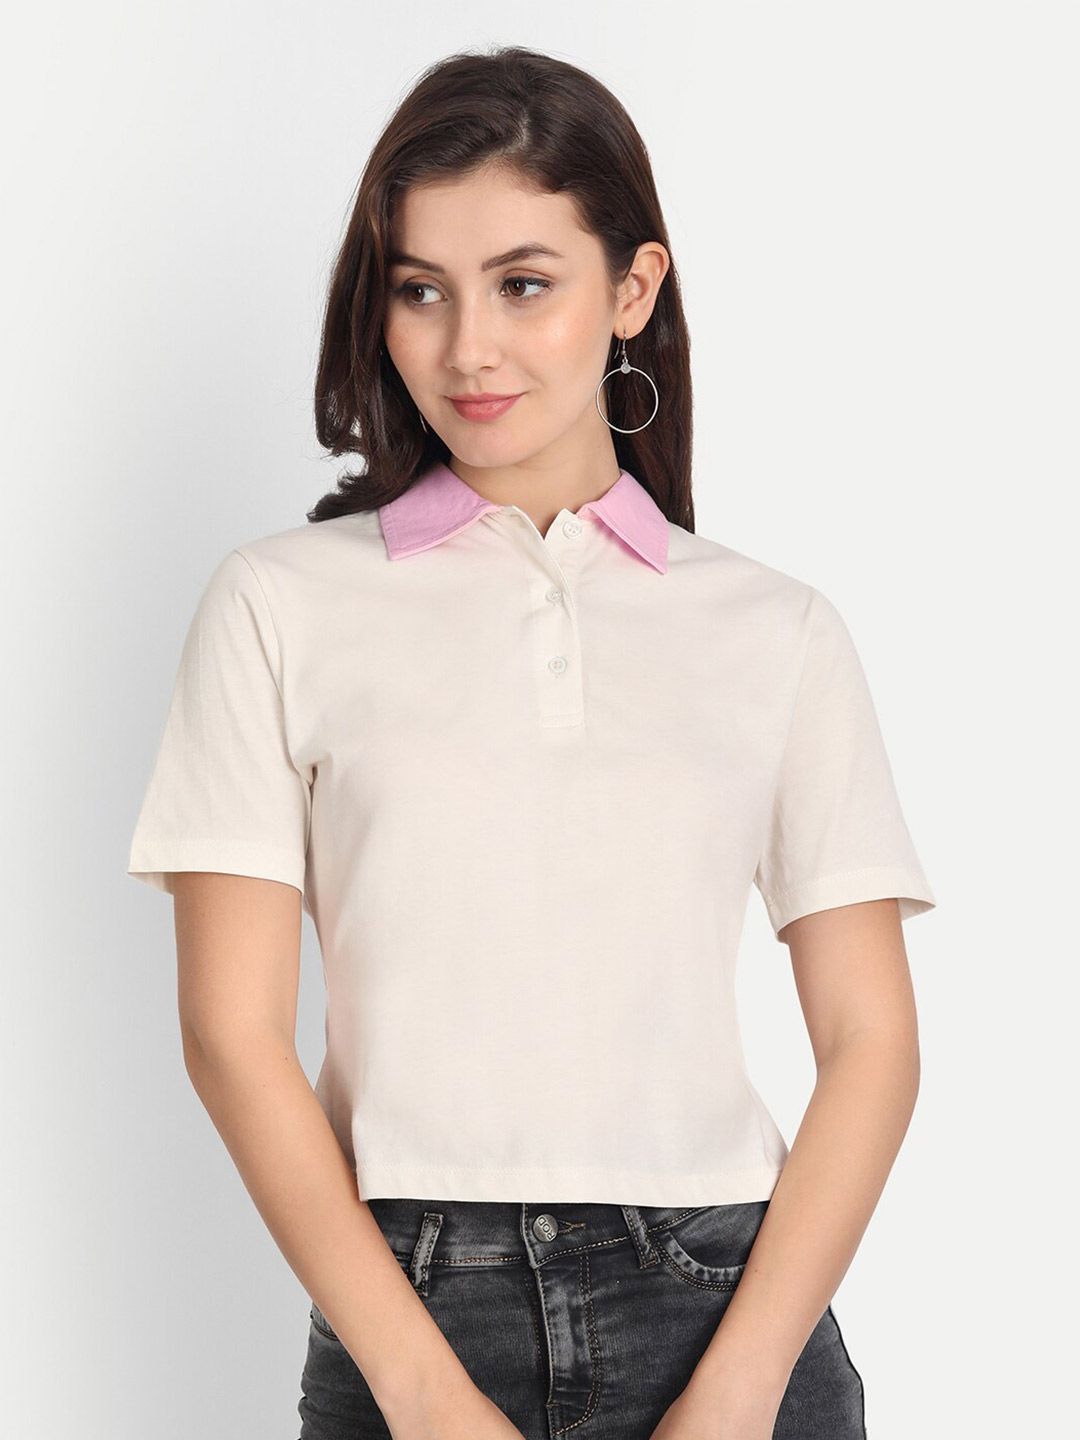 DOLSU Pure Cotton Shirt Style Top Price in India